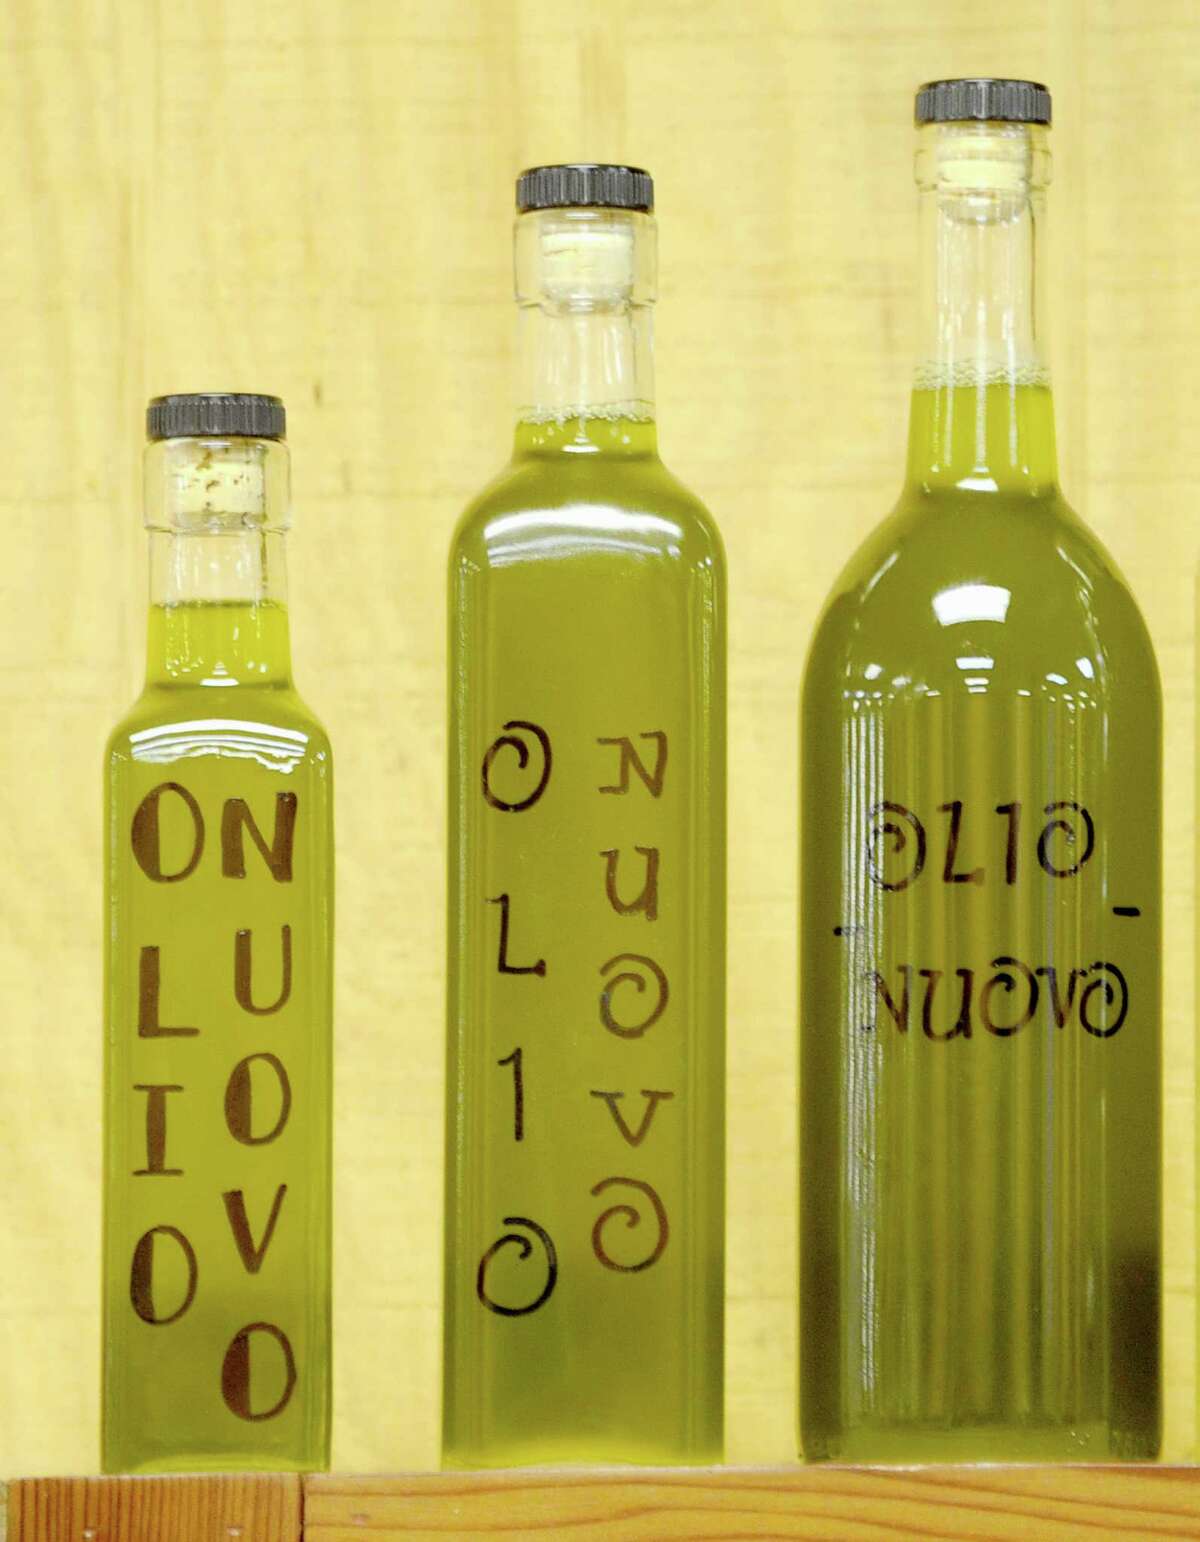 Monounsaturated oils such as olive, almond, peanut, safflower, sesame and canola are a good choice.